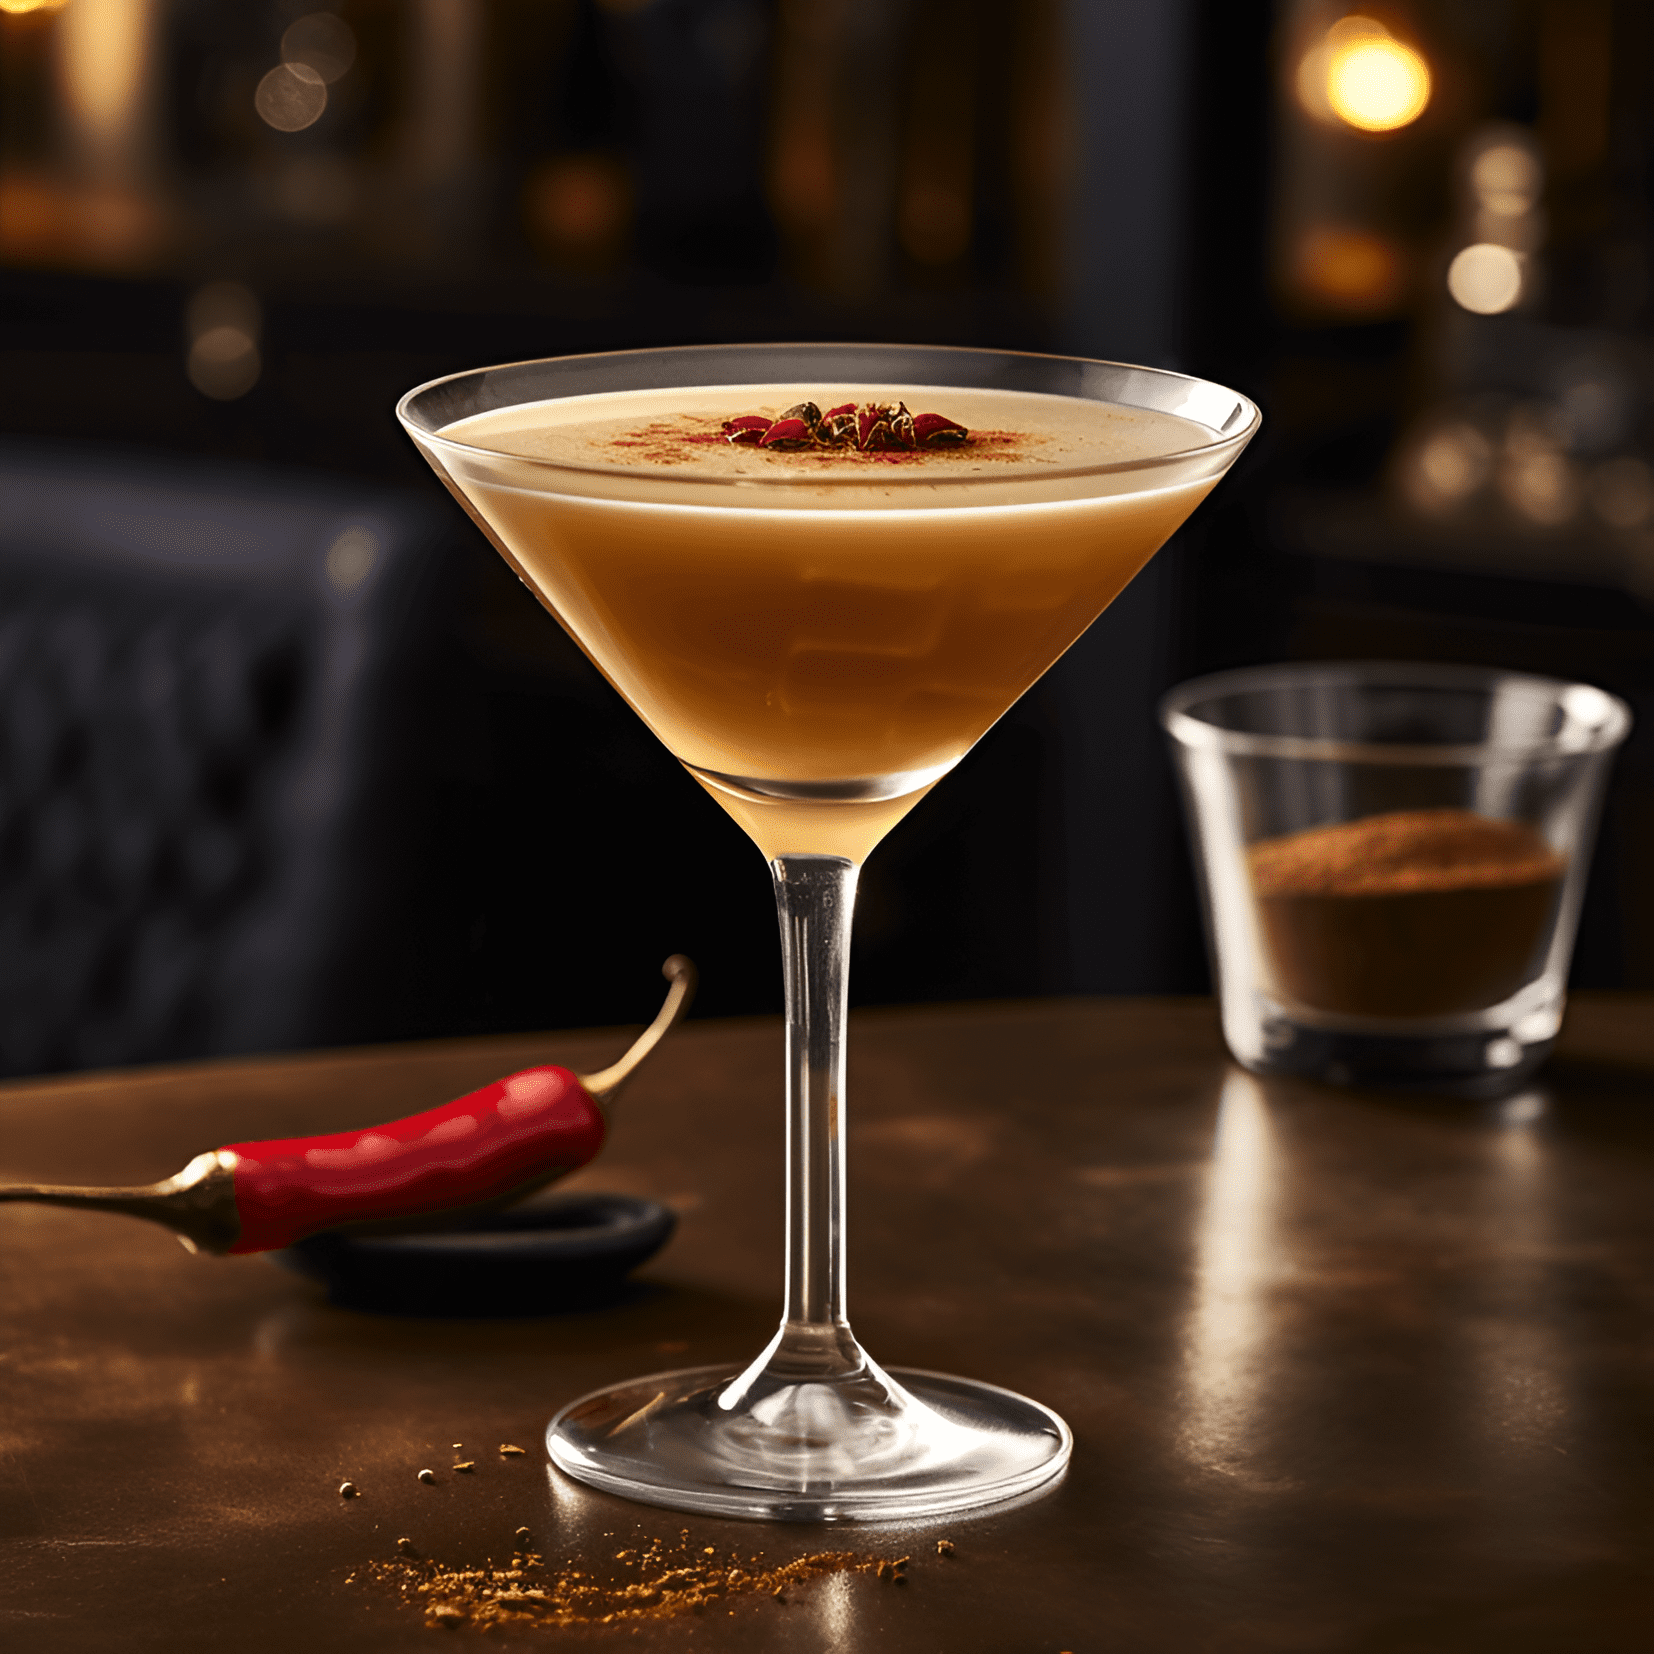 Spicy Fifty Cocktail Recipe - The Spicy Fifty is a well-balanced cocktail with a combination of sweet, sour, and spicy flavors. The sweetness from the vanilla vodka and elderflower liqueur is perfectly complemented by the sourness of the lime juice and the heat from the chili pepper.